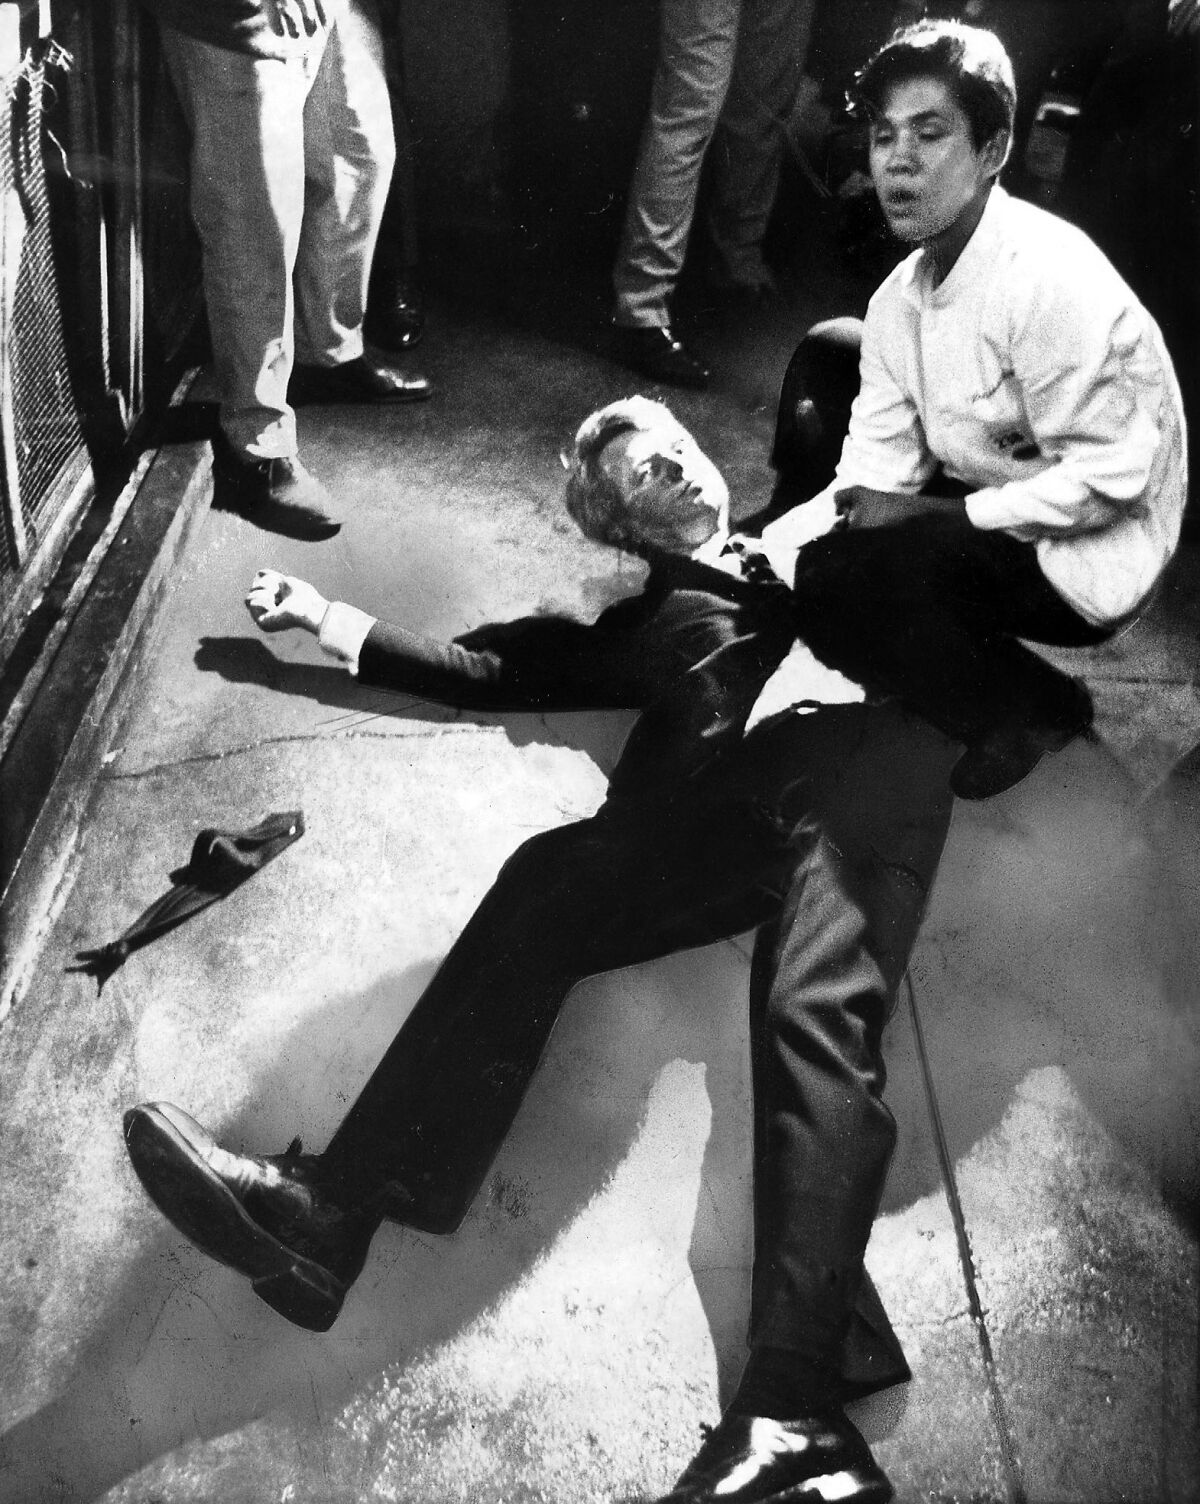 Presidential candidate Robert F. Kennedy lies on the floor at the Ambassador Hotel in Los Angeles moments after he was shot in the head. He had just finished his victory speech upon winning the California primary.